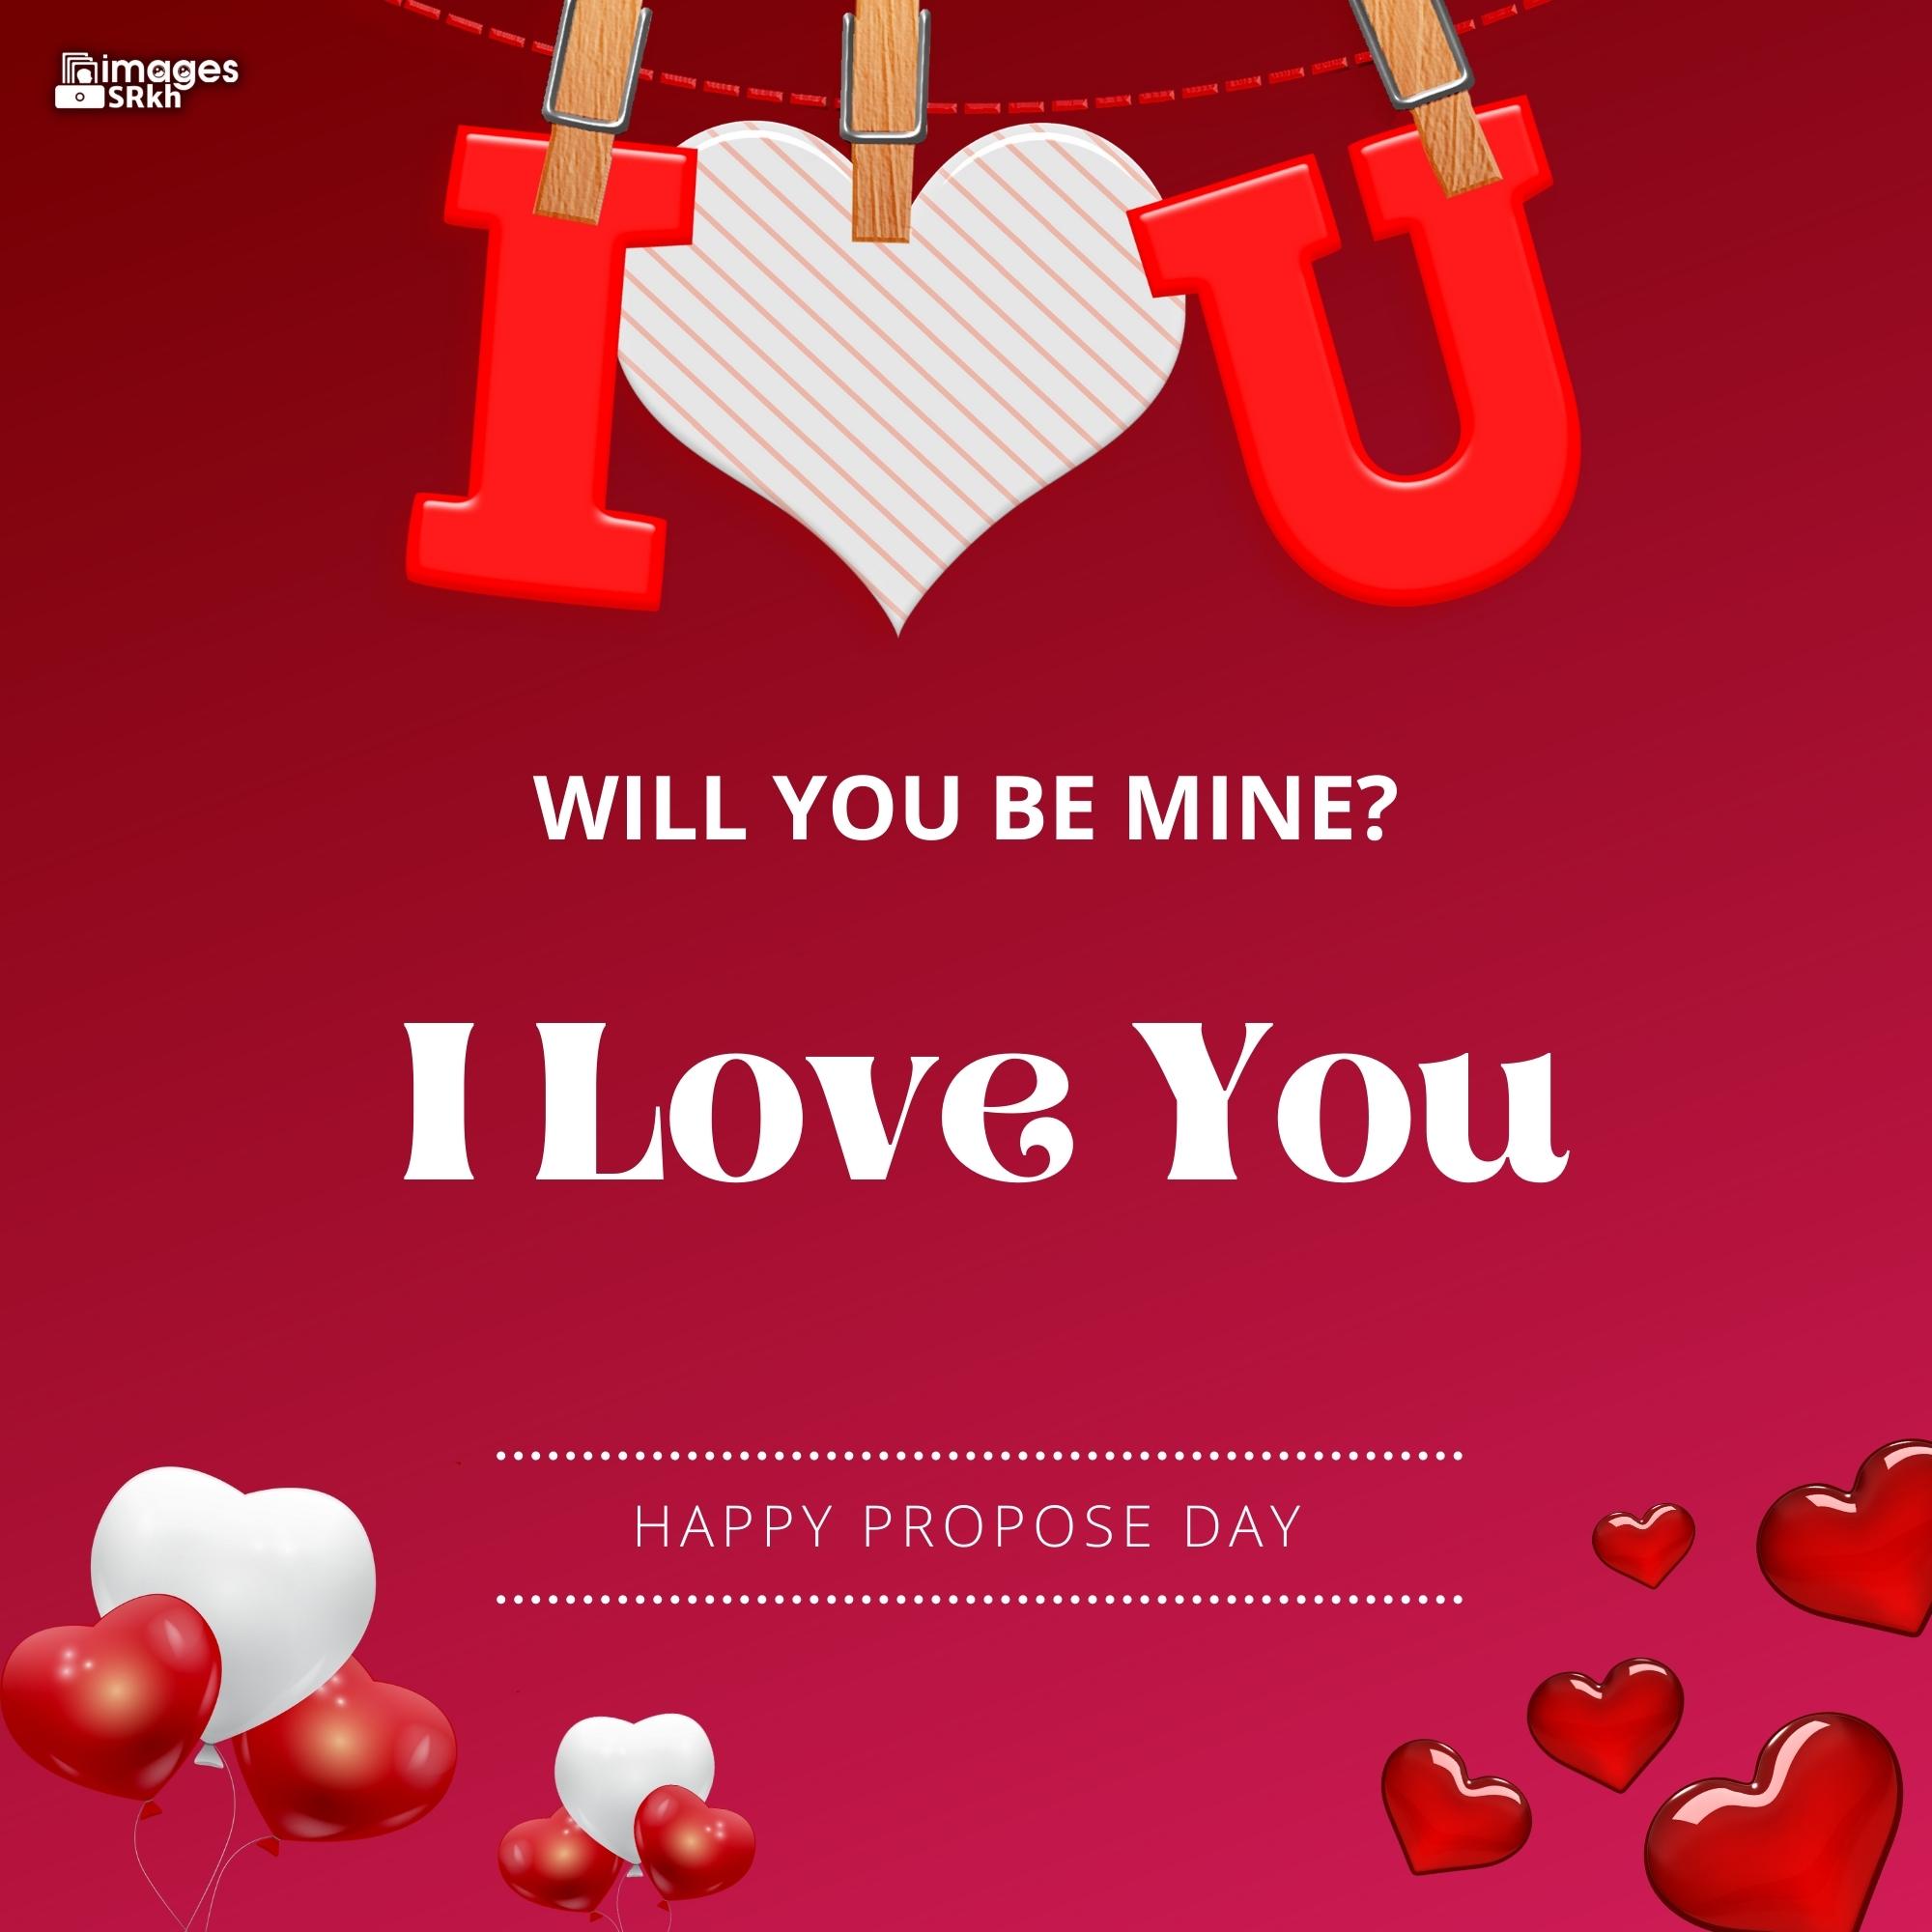 Happy Propose Day Images | 434 | I love you will you be mine